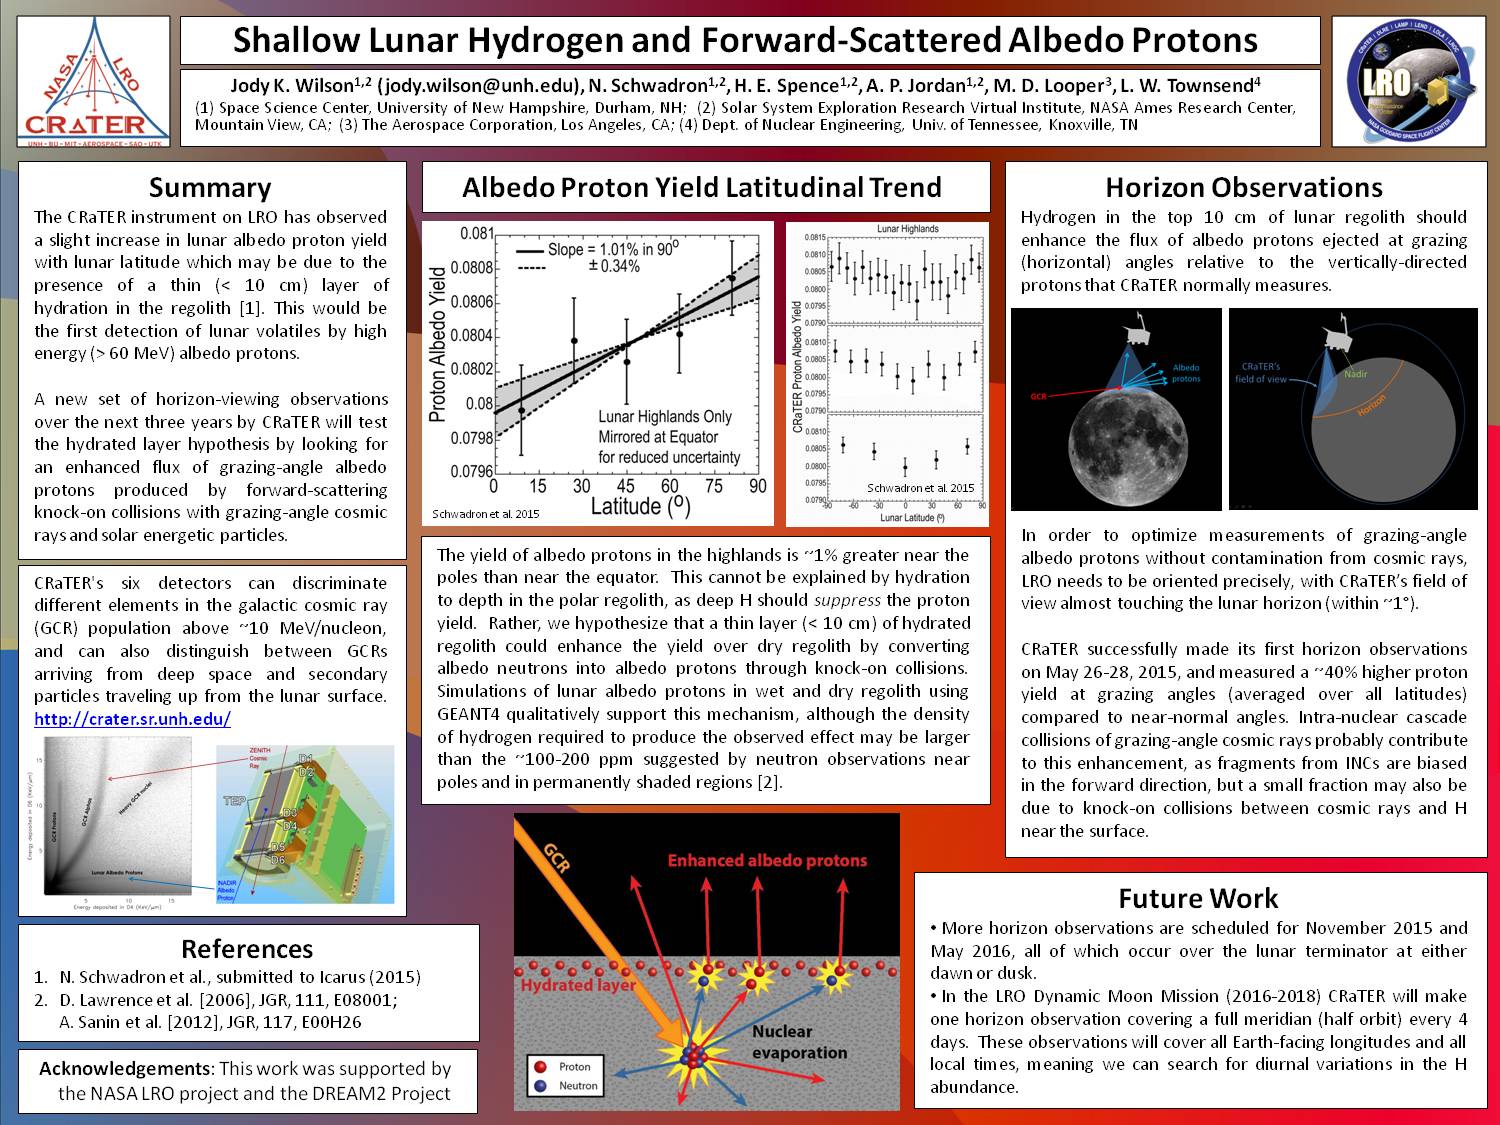 Shallow Lunar Hydrogen And Forward-Scattered Albedo Protons by jkwilson